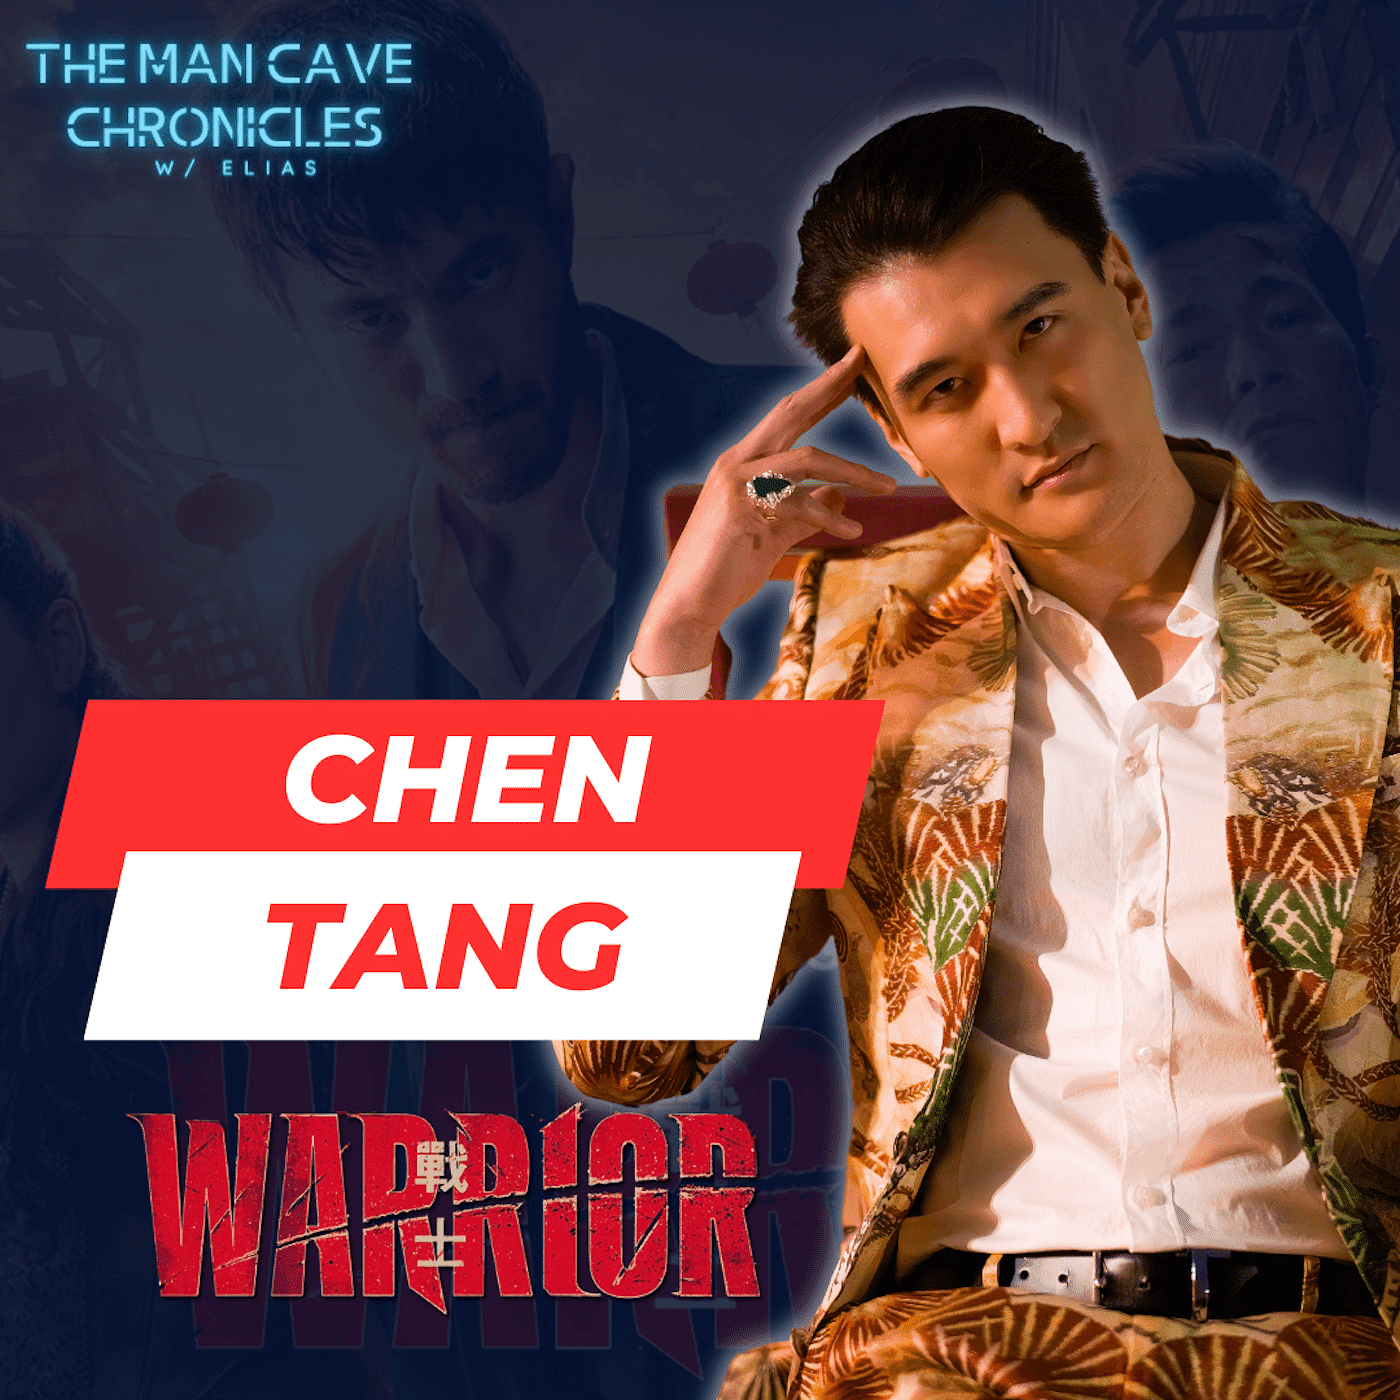 Inside 'WARRIOR' Season 3: Chen Tang Explores Hong's Epic Storyline, The  Man Cave Chronicles w/ Elias